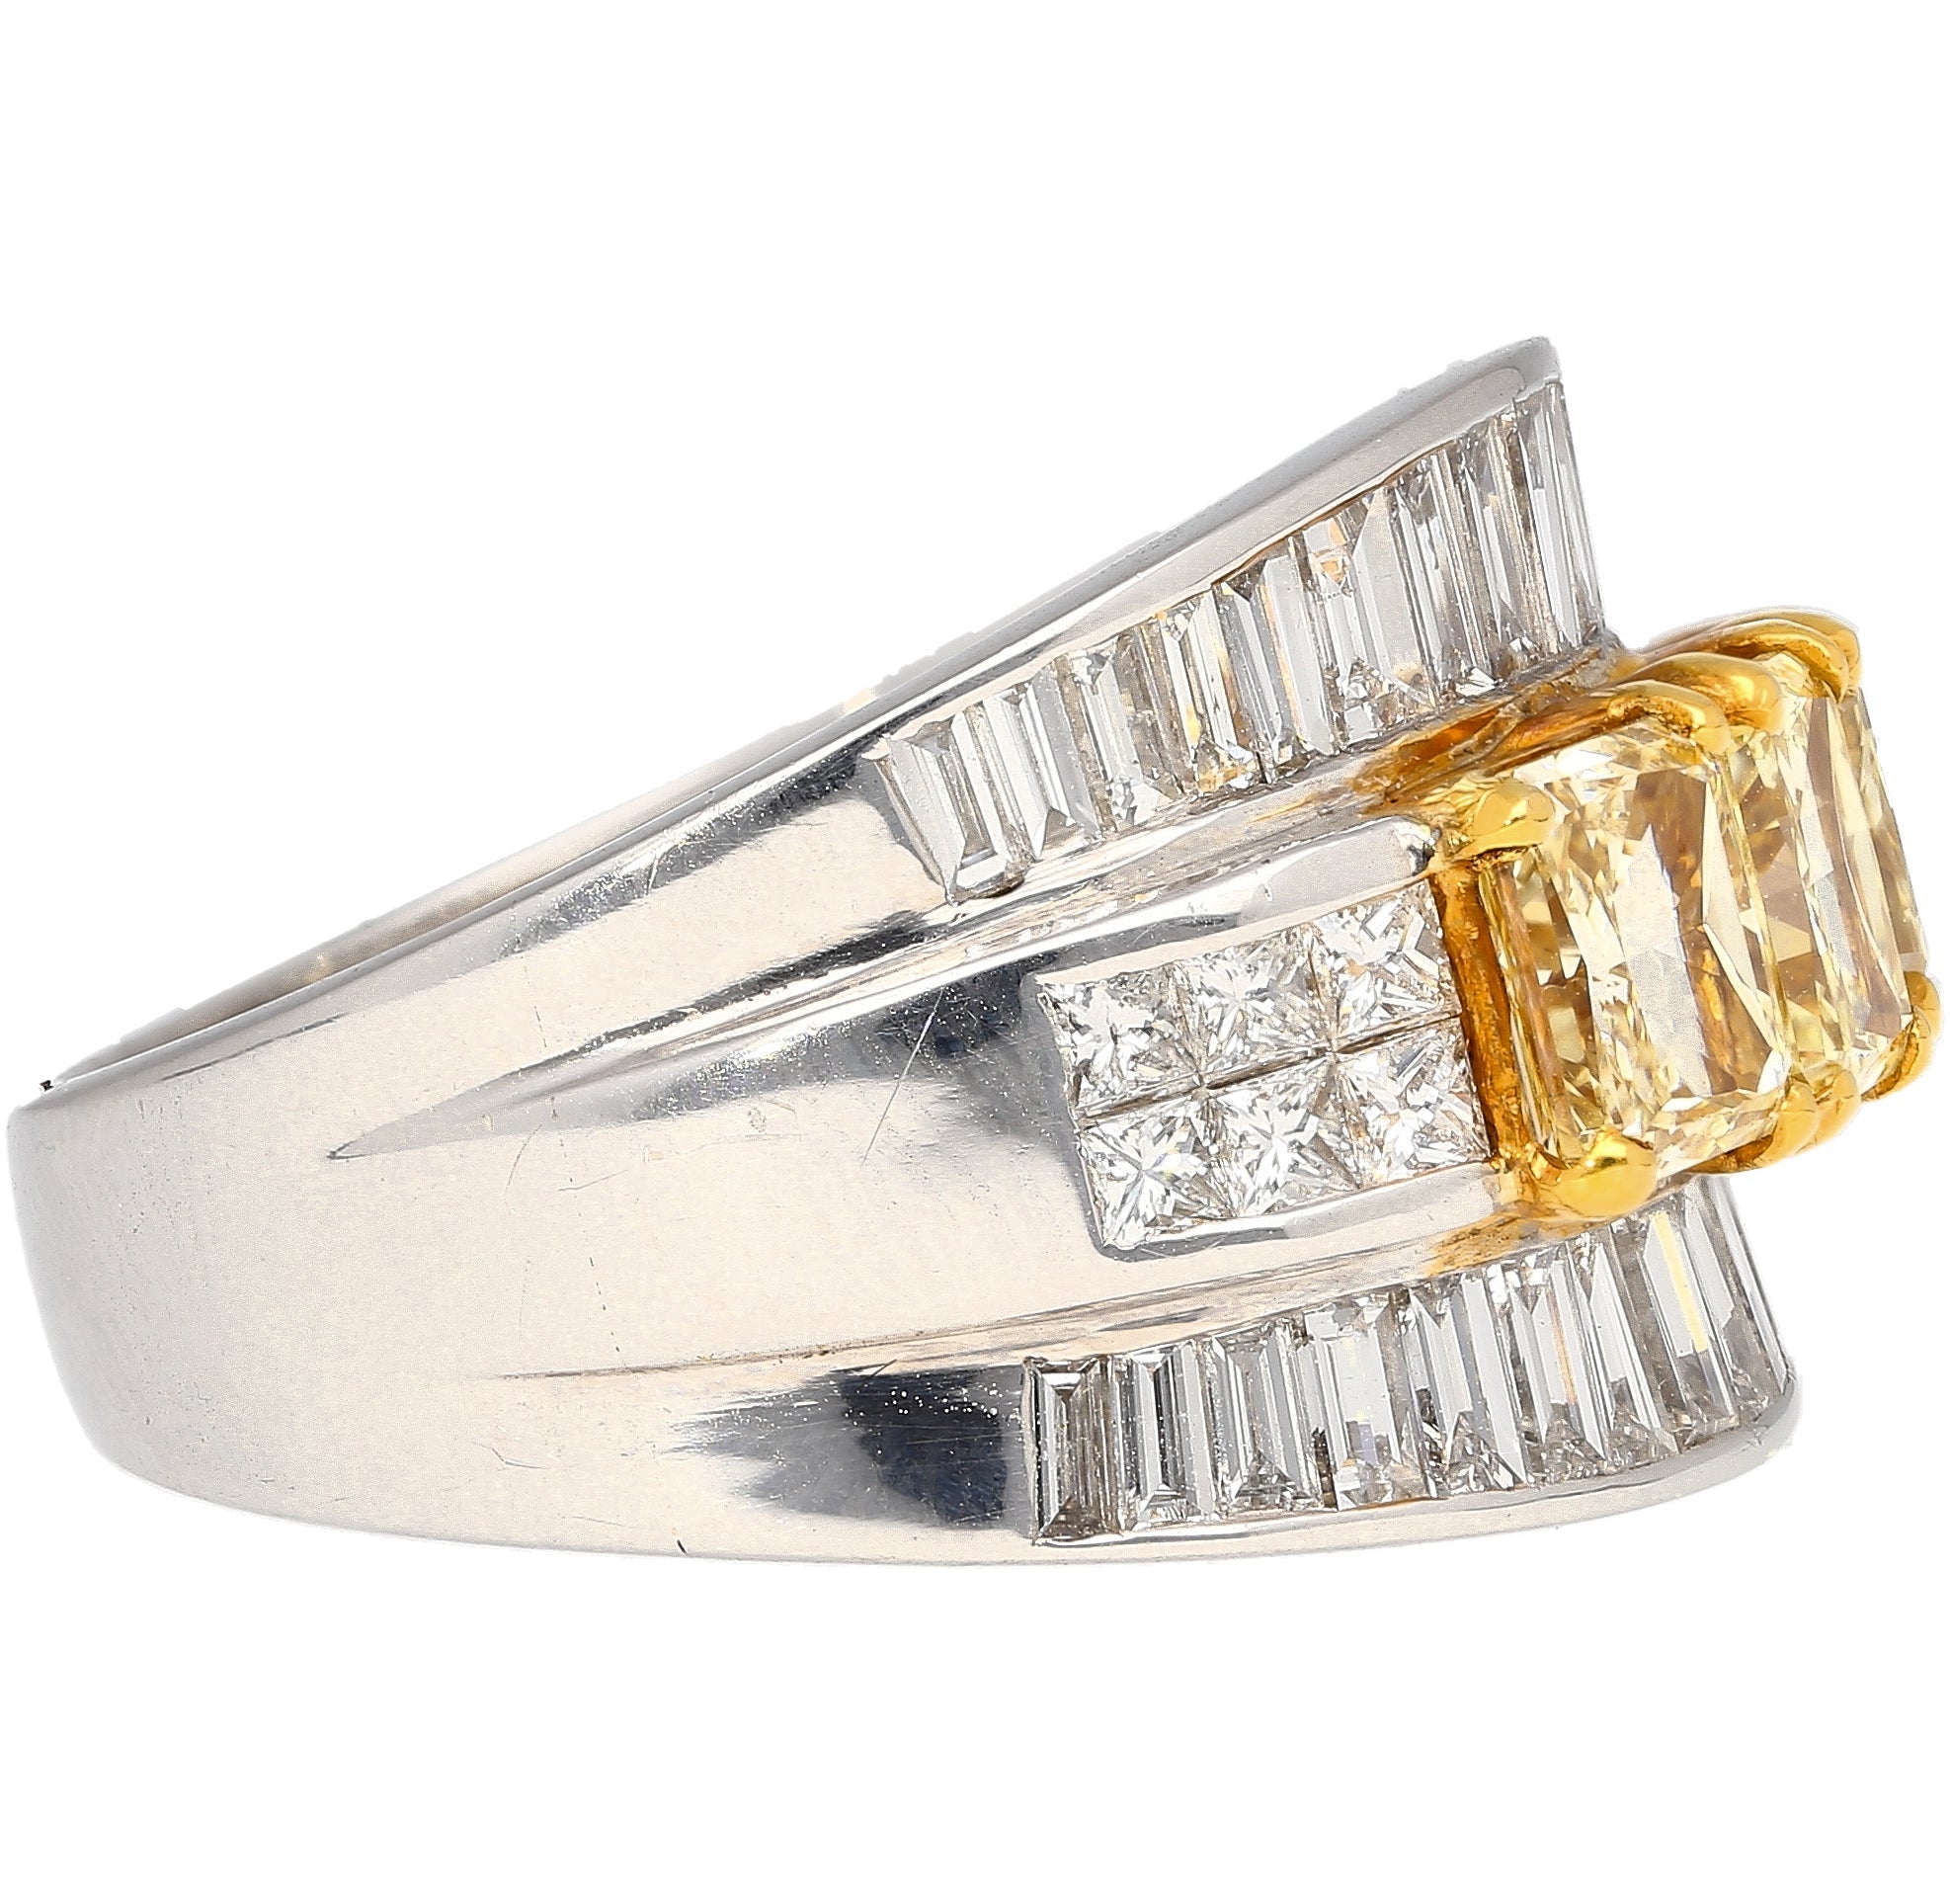 3.28 Carat TW Natural Radiant Cut Fancy Yellow Diamond 3-Stone Ring in 18K White Gold